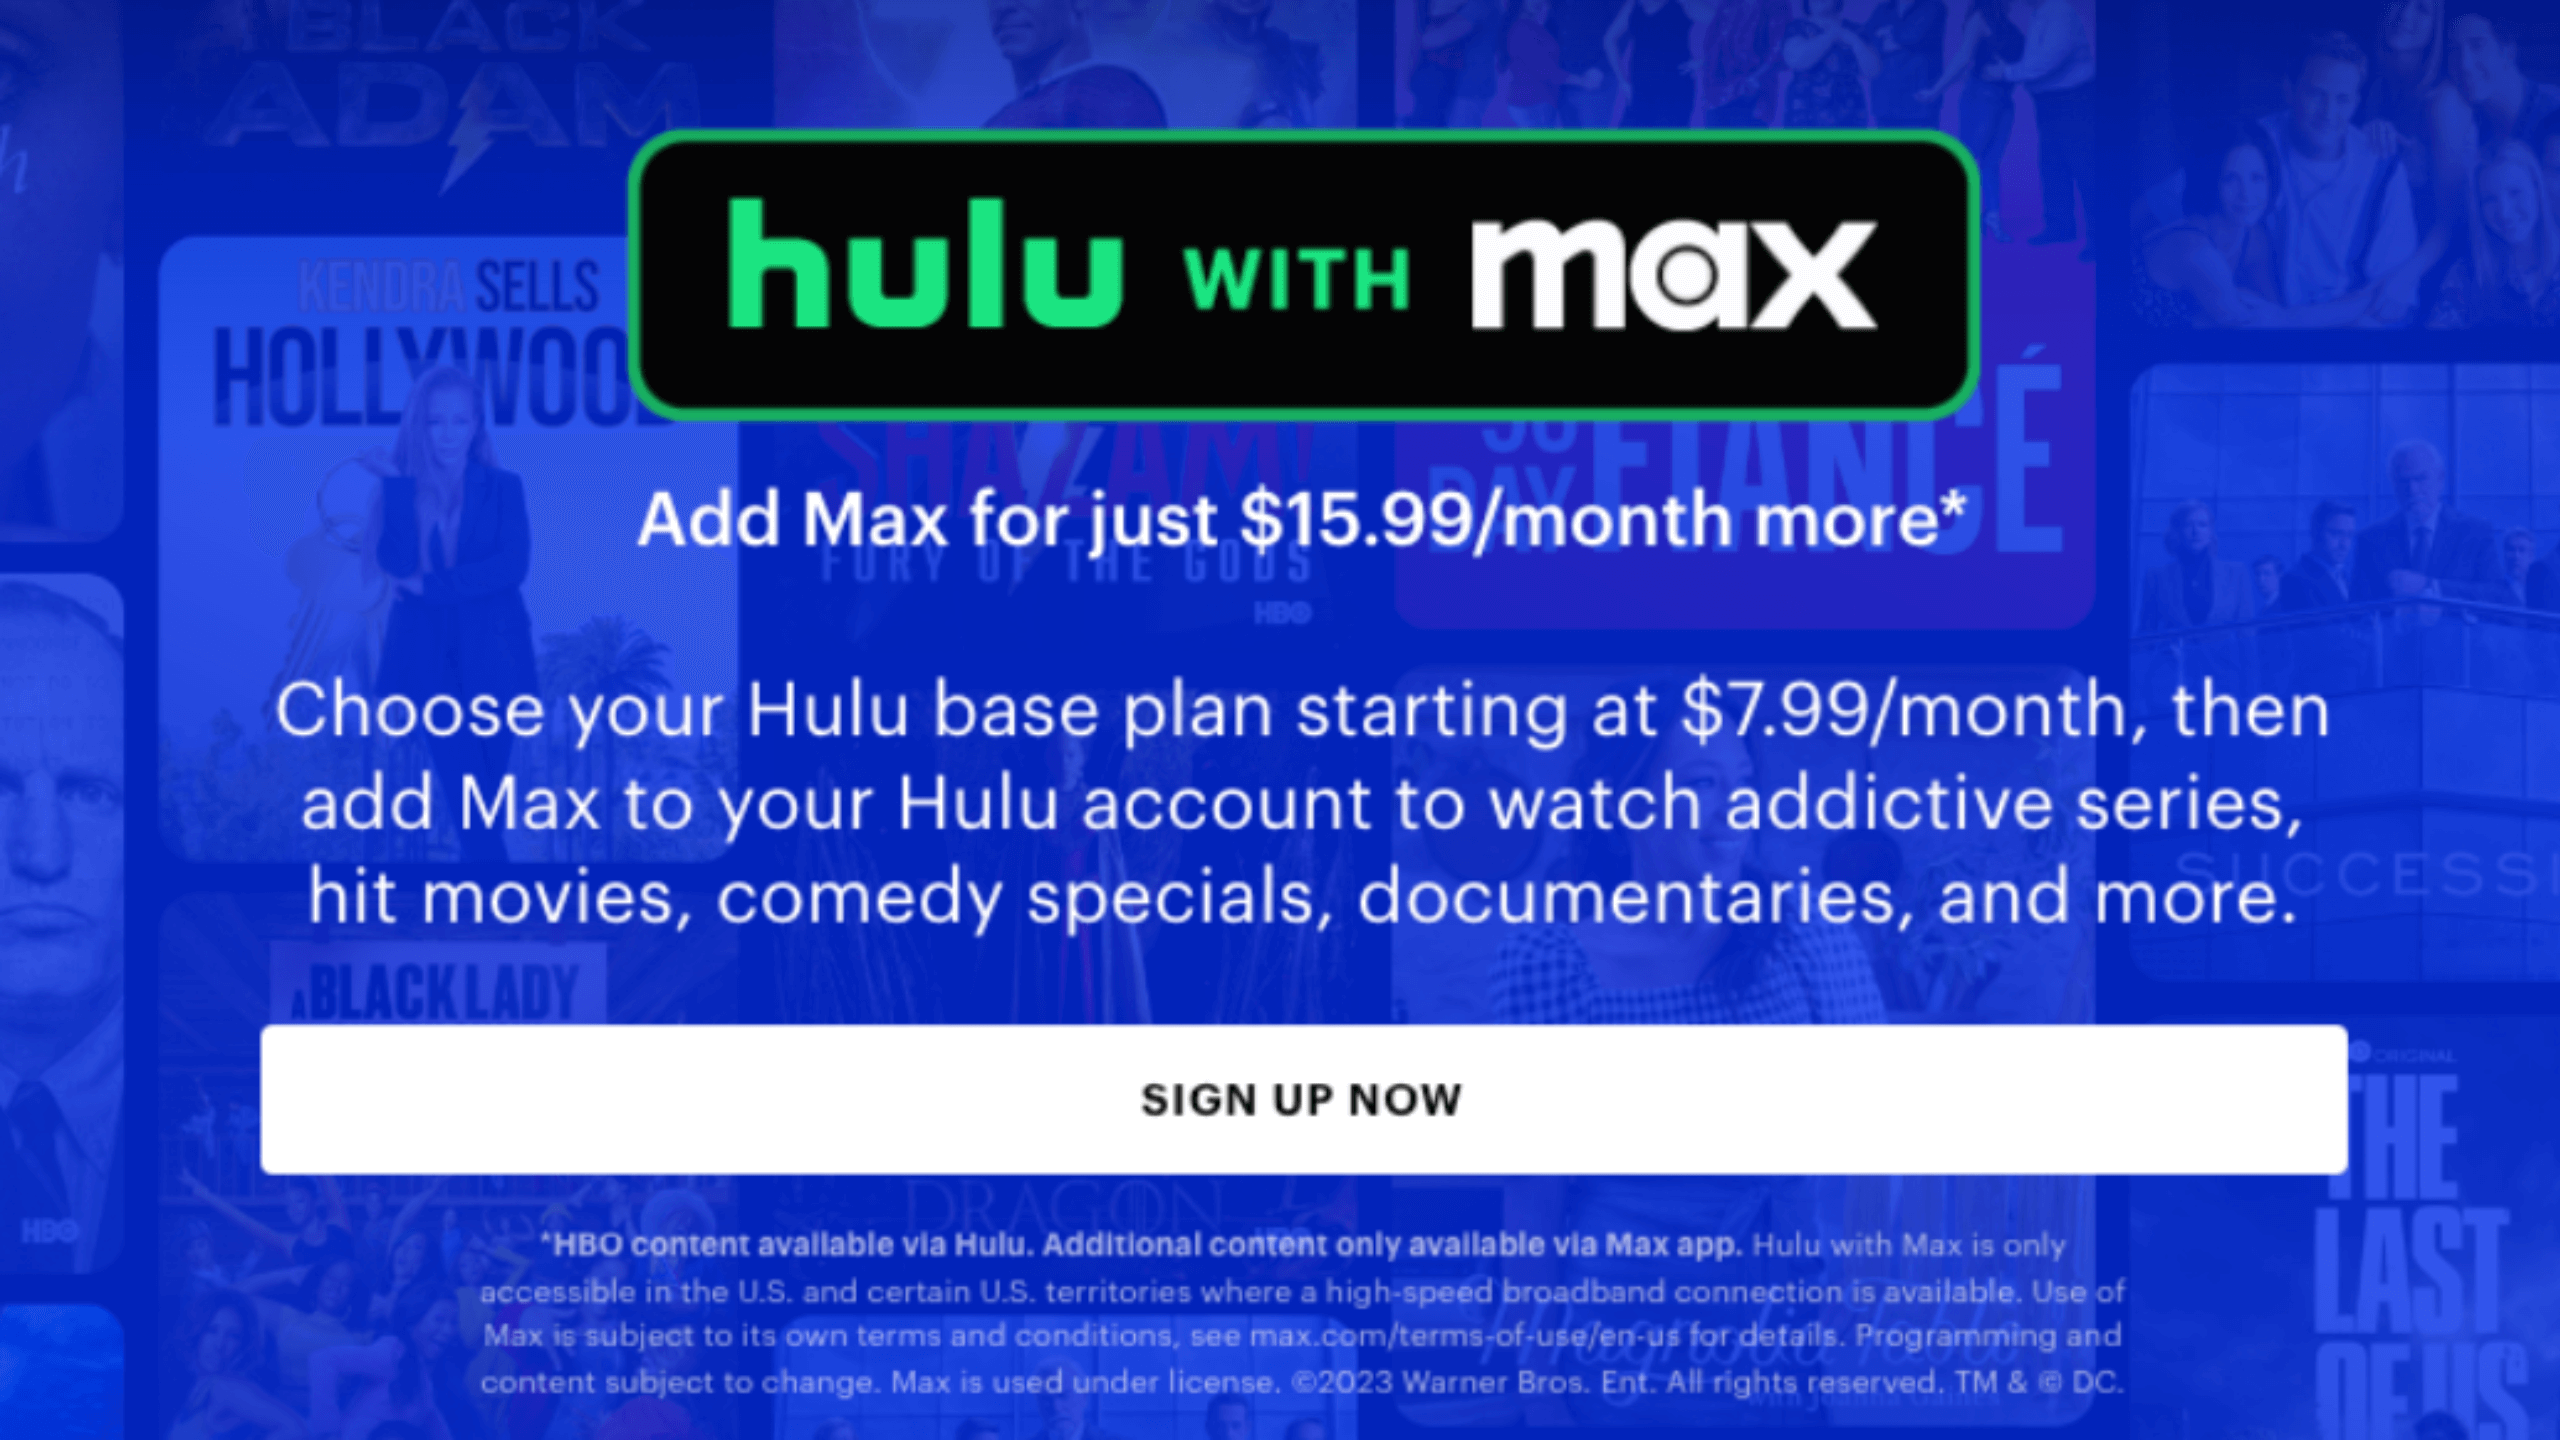 How Much is HBO Max? Price, Bundles, and Deals